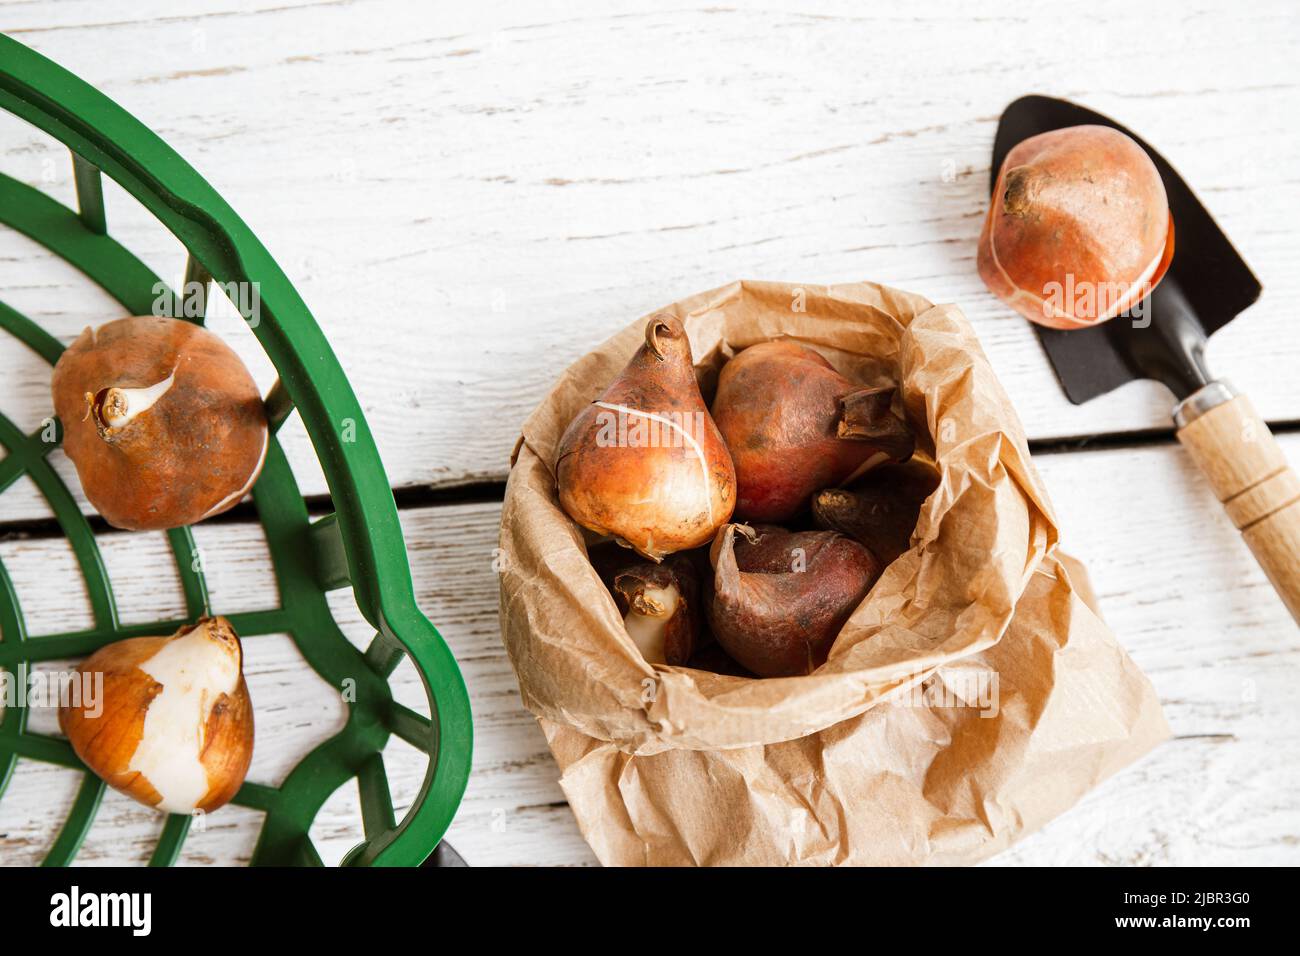 Above view of tulip planting basket with tulip bulbs in brown paper bag in autumn. White wood board gardening background. Stock Photo